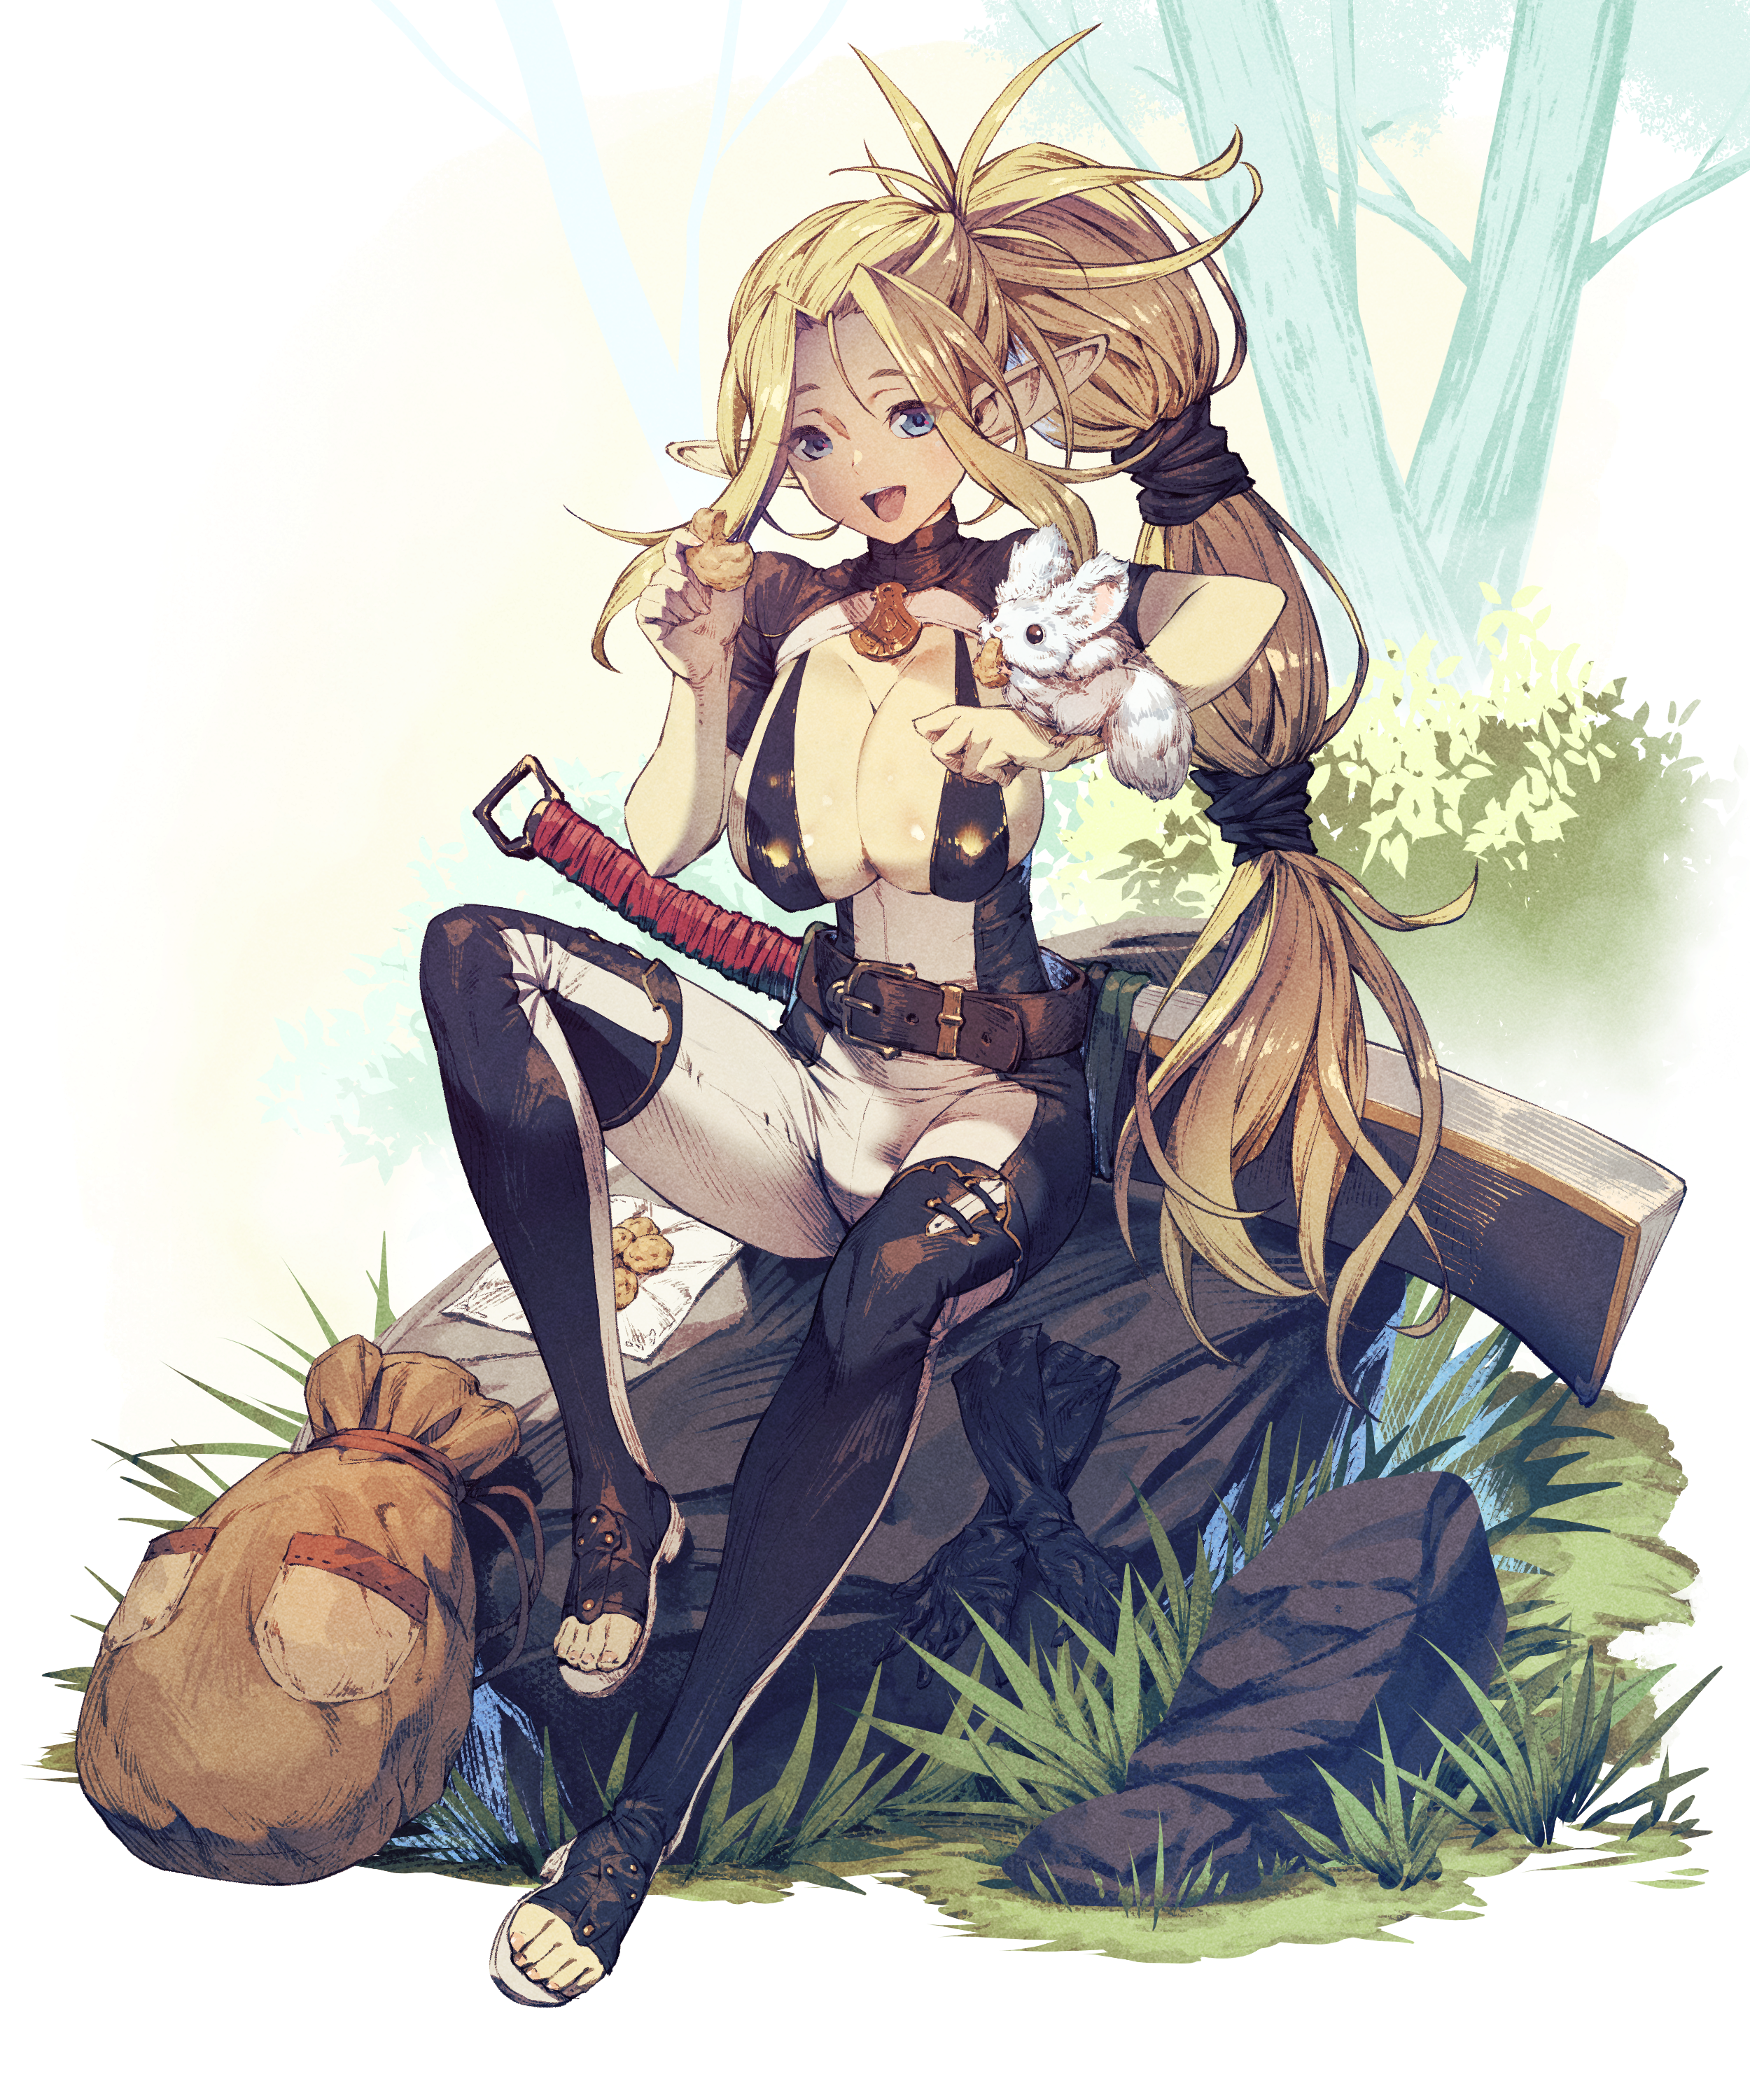 Anime 2500x3000 elves fantasy girl pointy ears women anime girls blonde ponytail long hair blue eyes open mouth happy cleavage big boobs sitting thigh-highs belt sword rocks cookies animals forest anime original characters artwork drawing 2D digital art illustration Chyko weapon